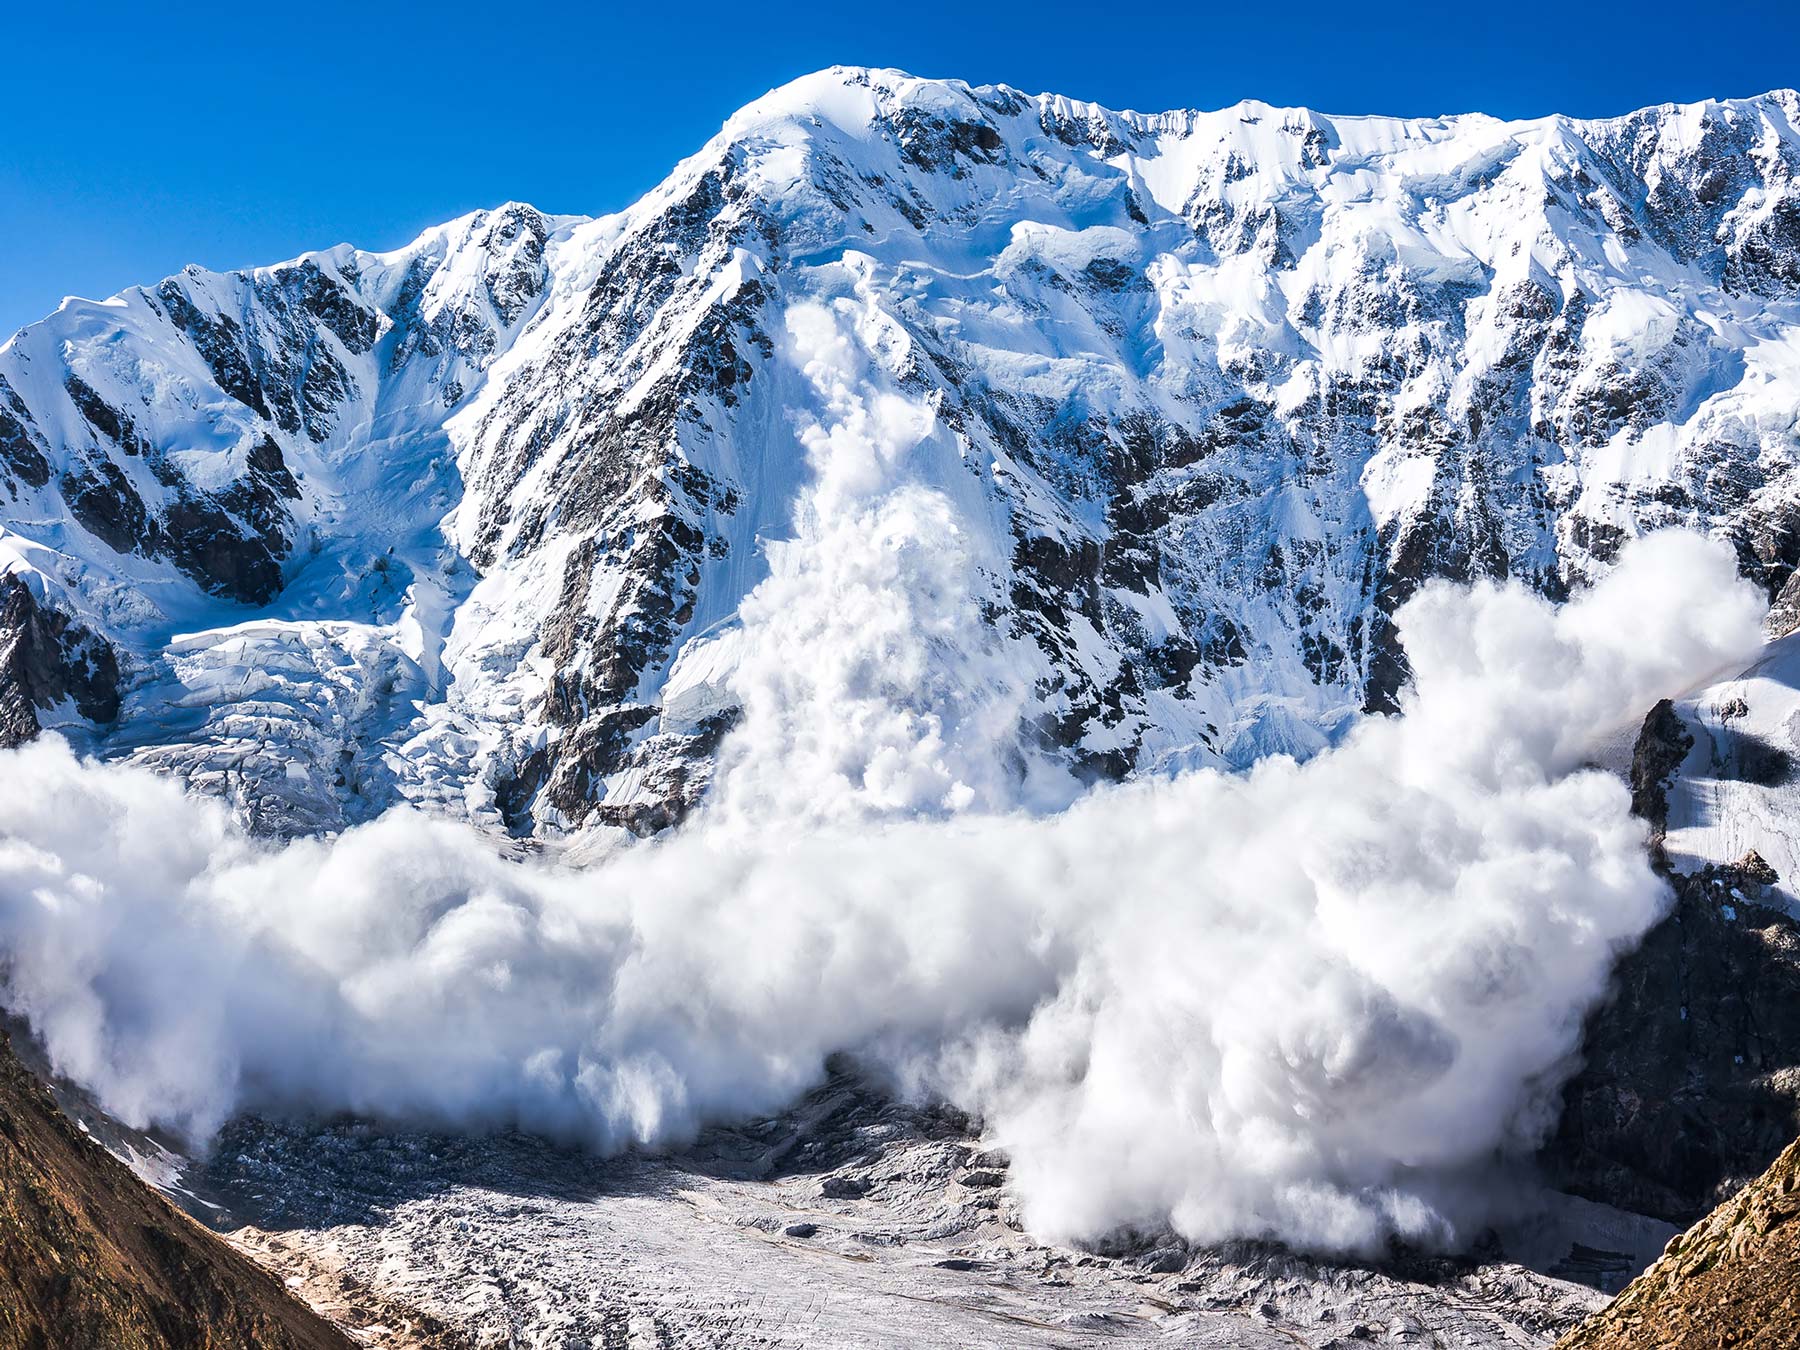 Snow avalanche coming down a big mountain